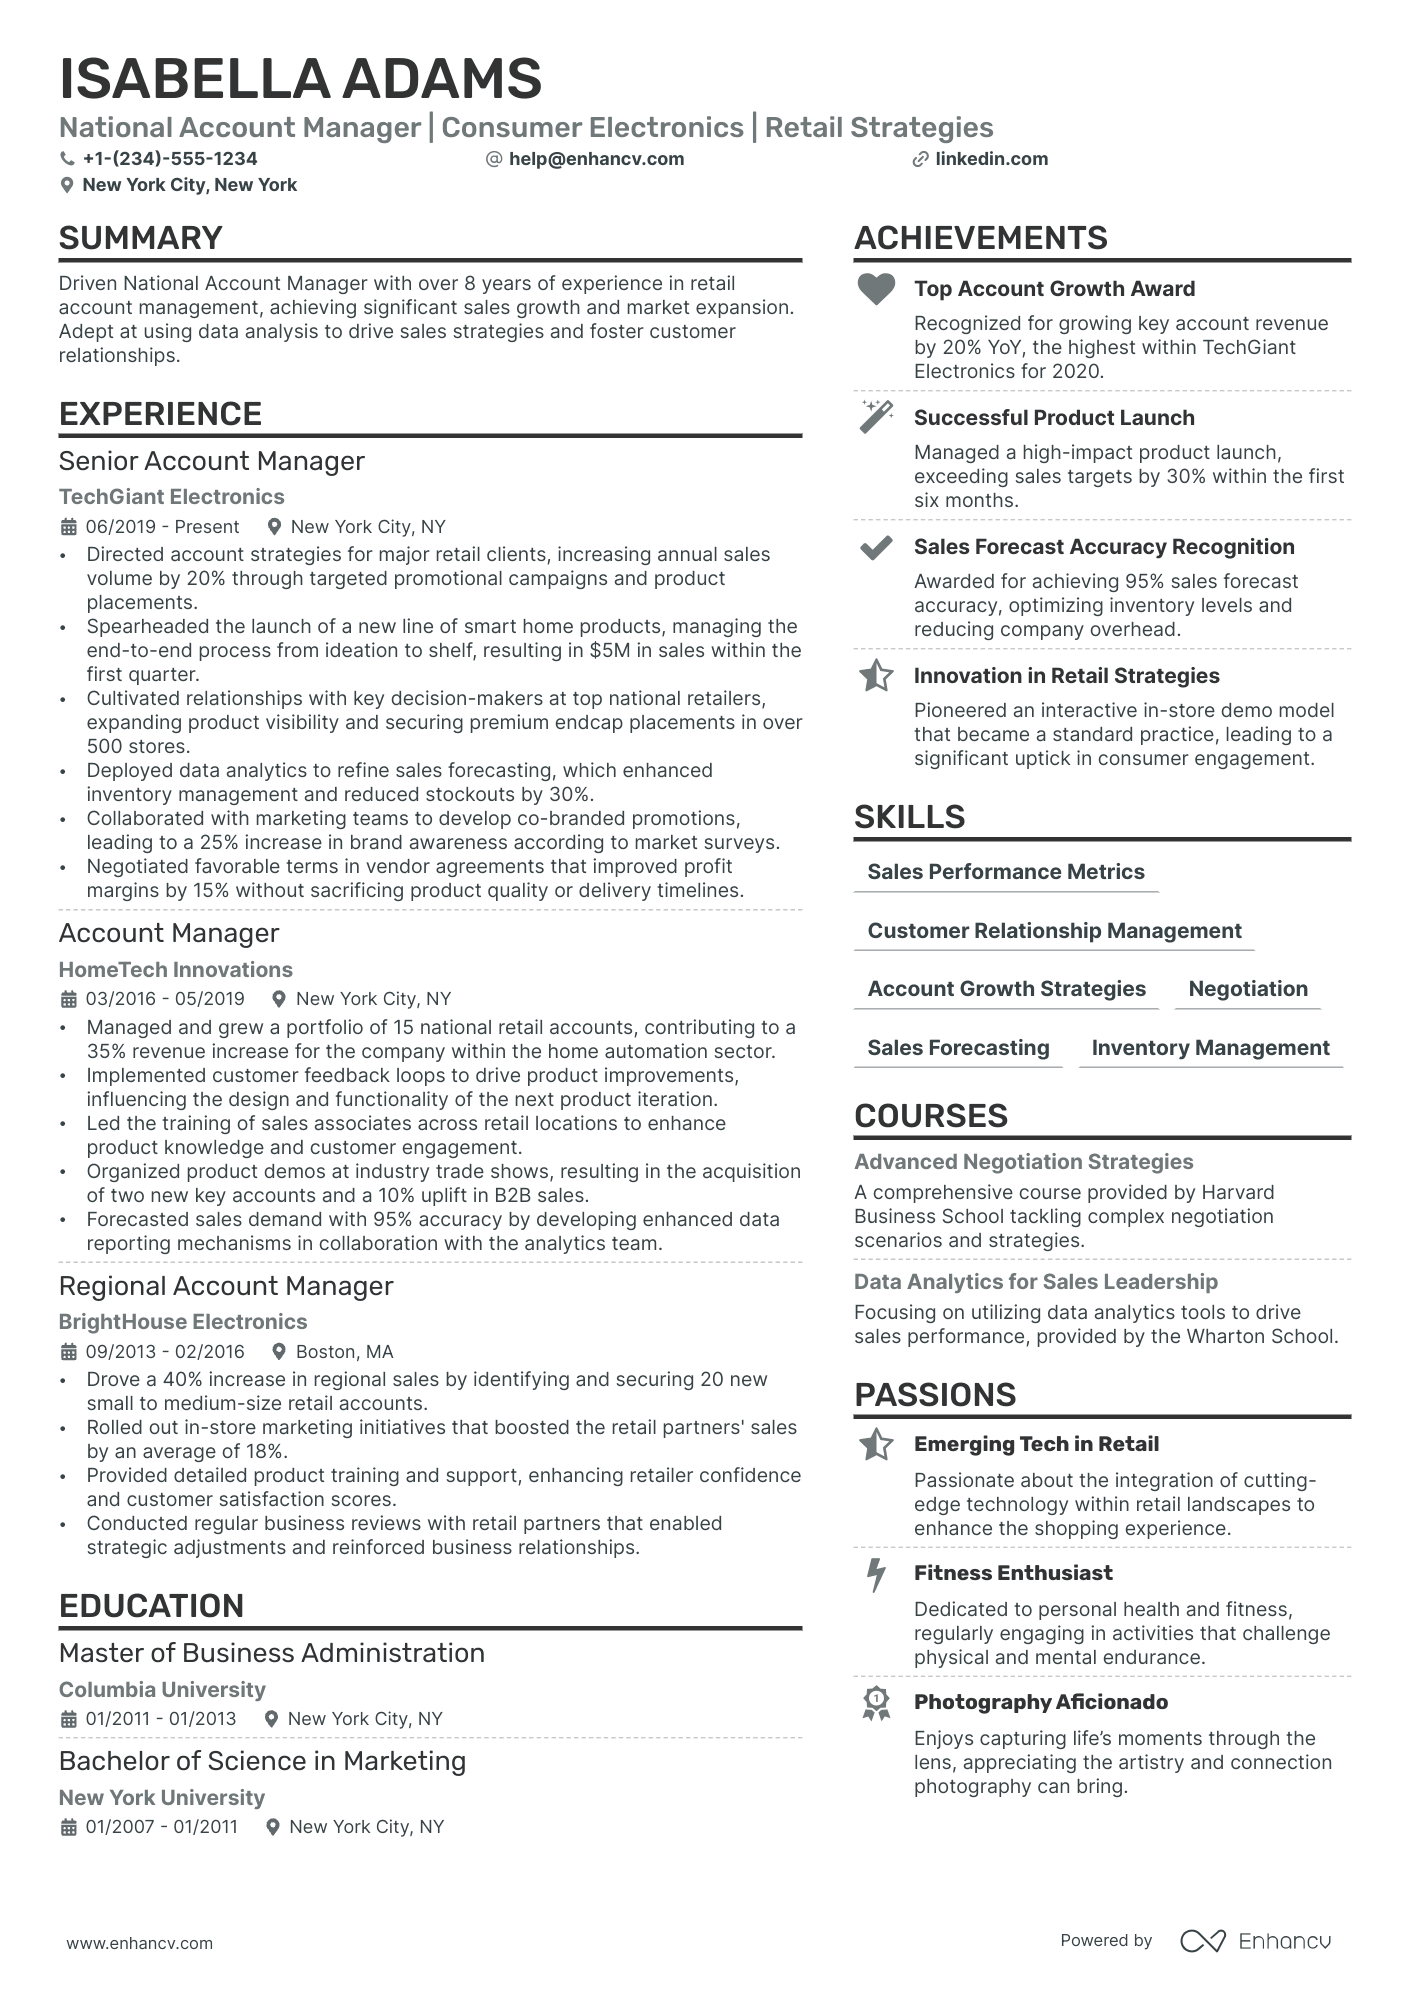 National Account Manager resume example